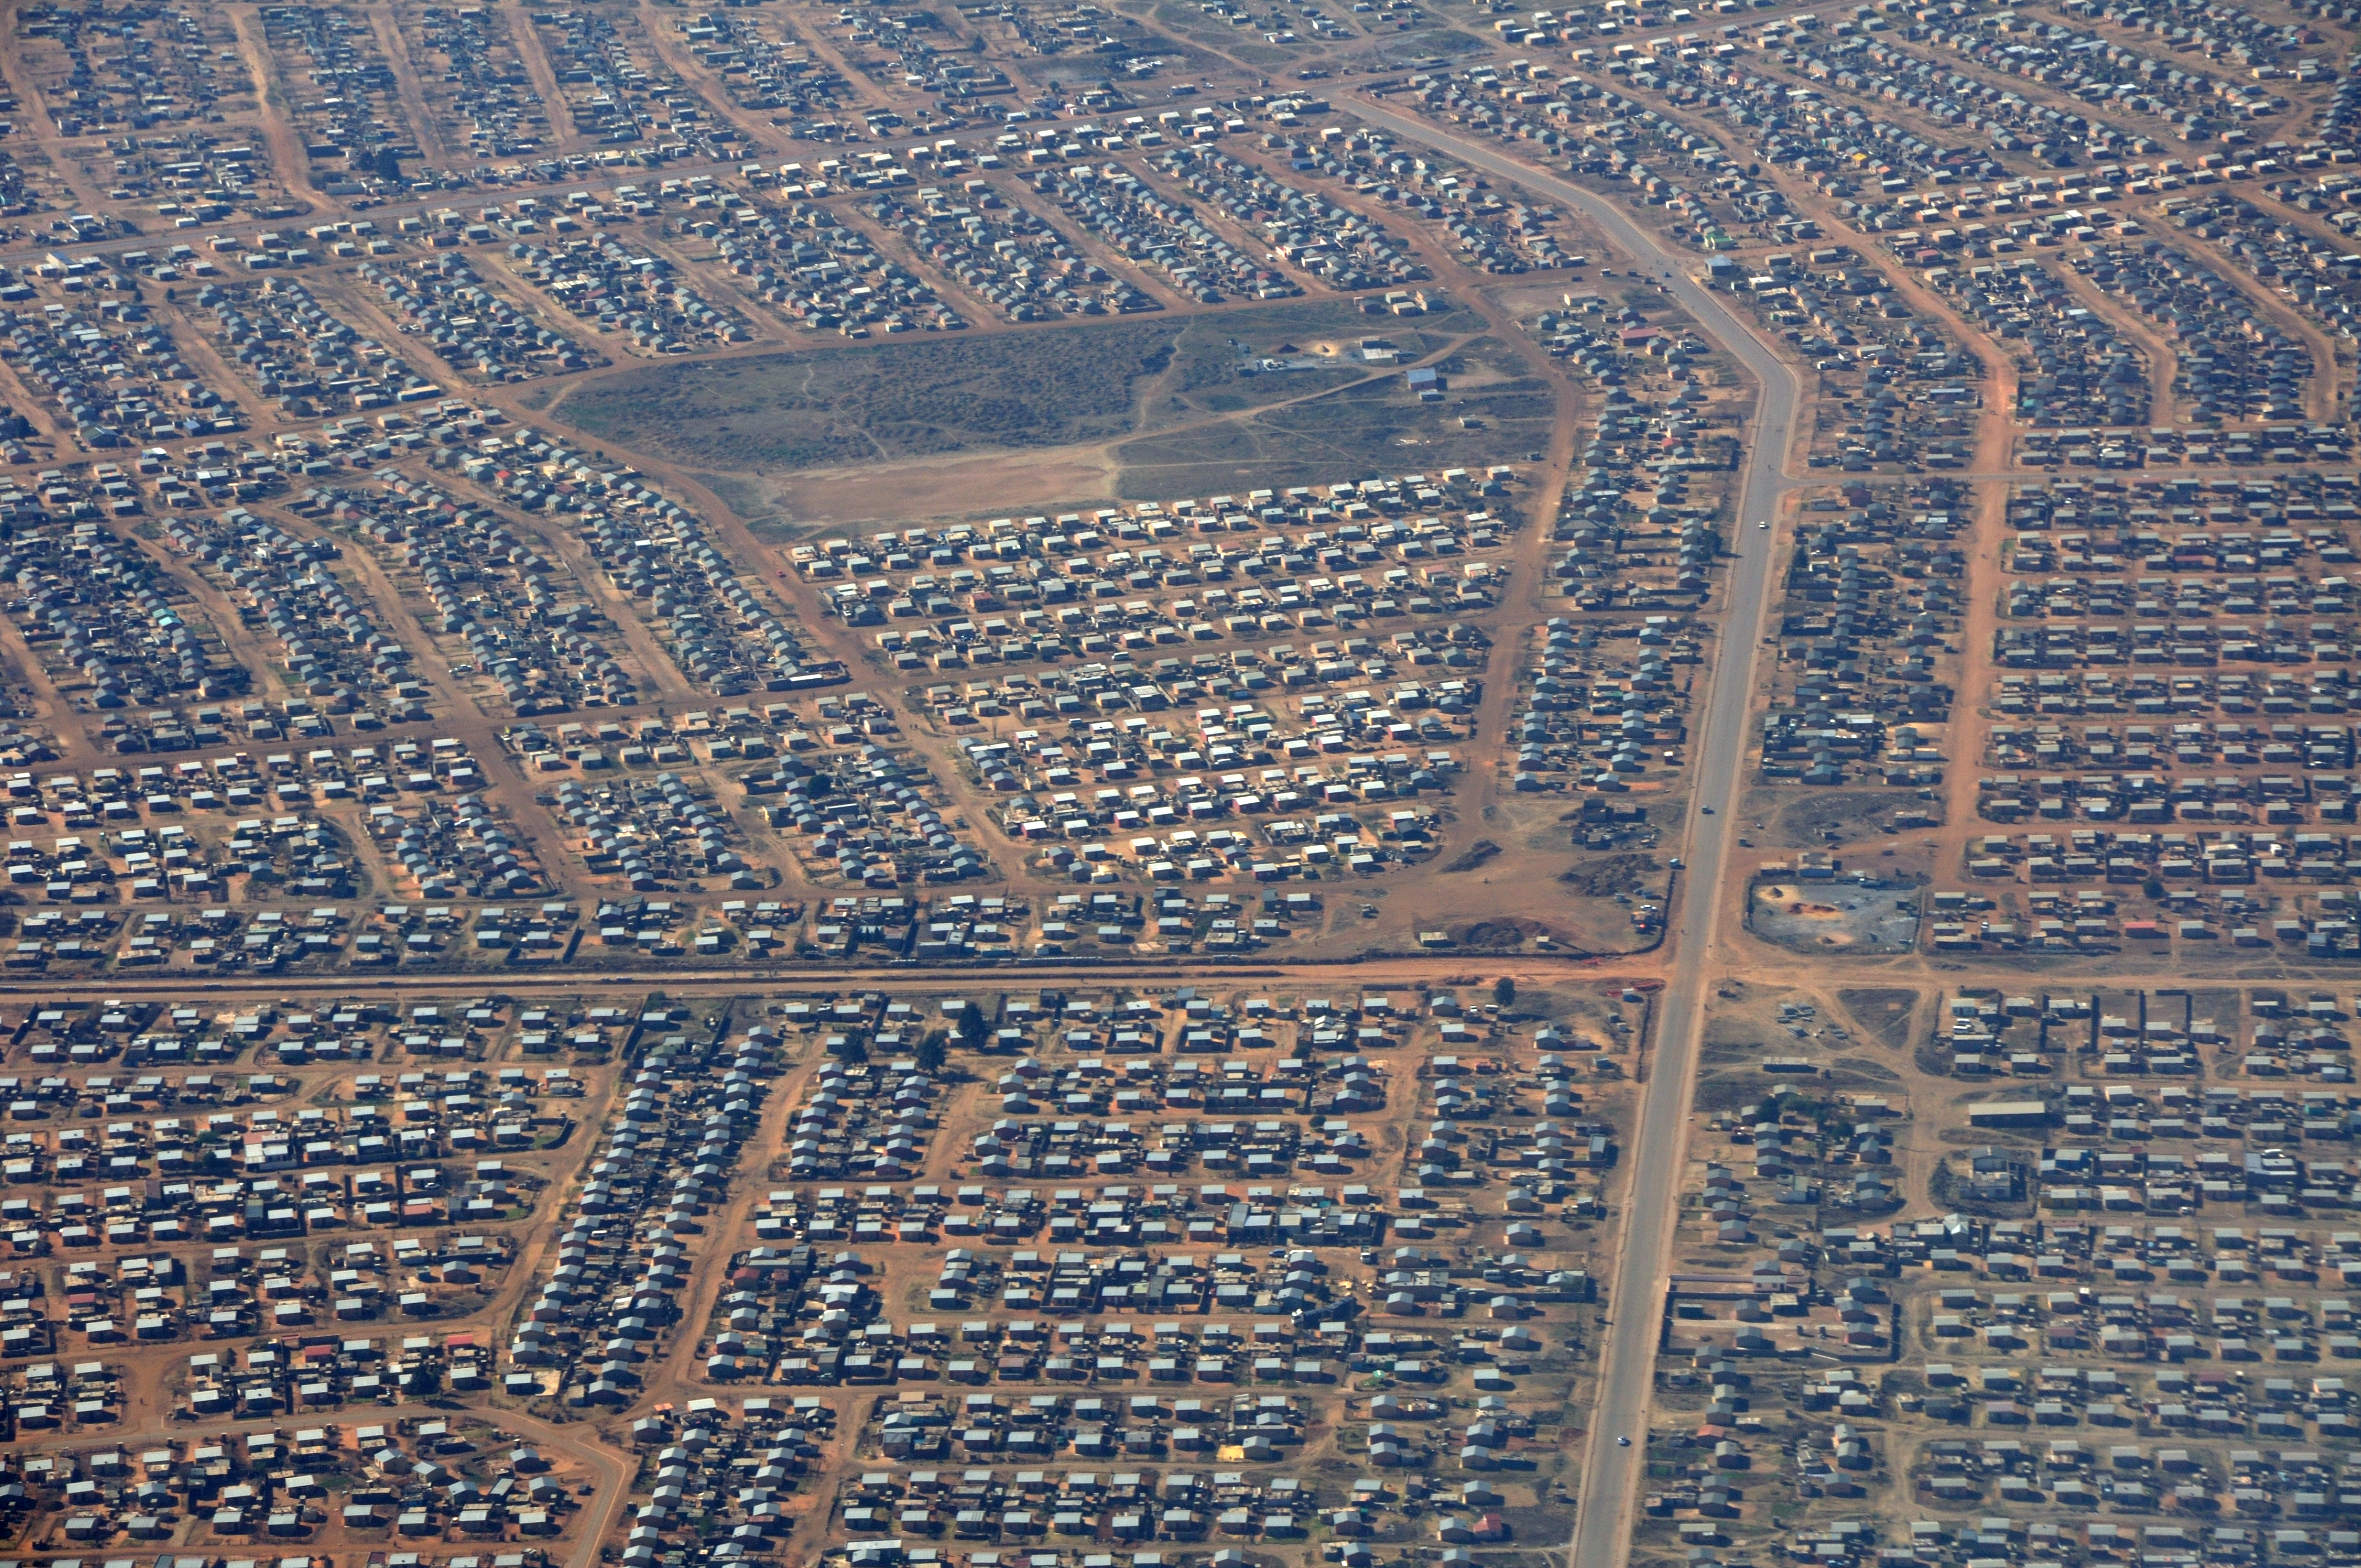 Soweto: Most Up-to-Date Encyclopedia, News & Reviews